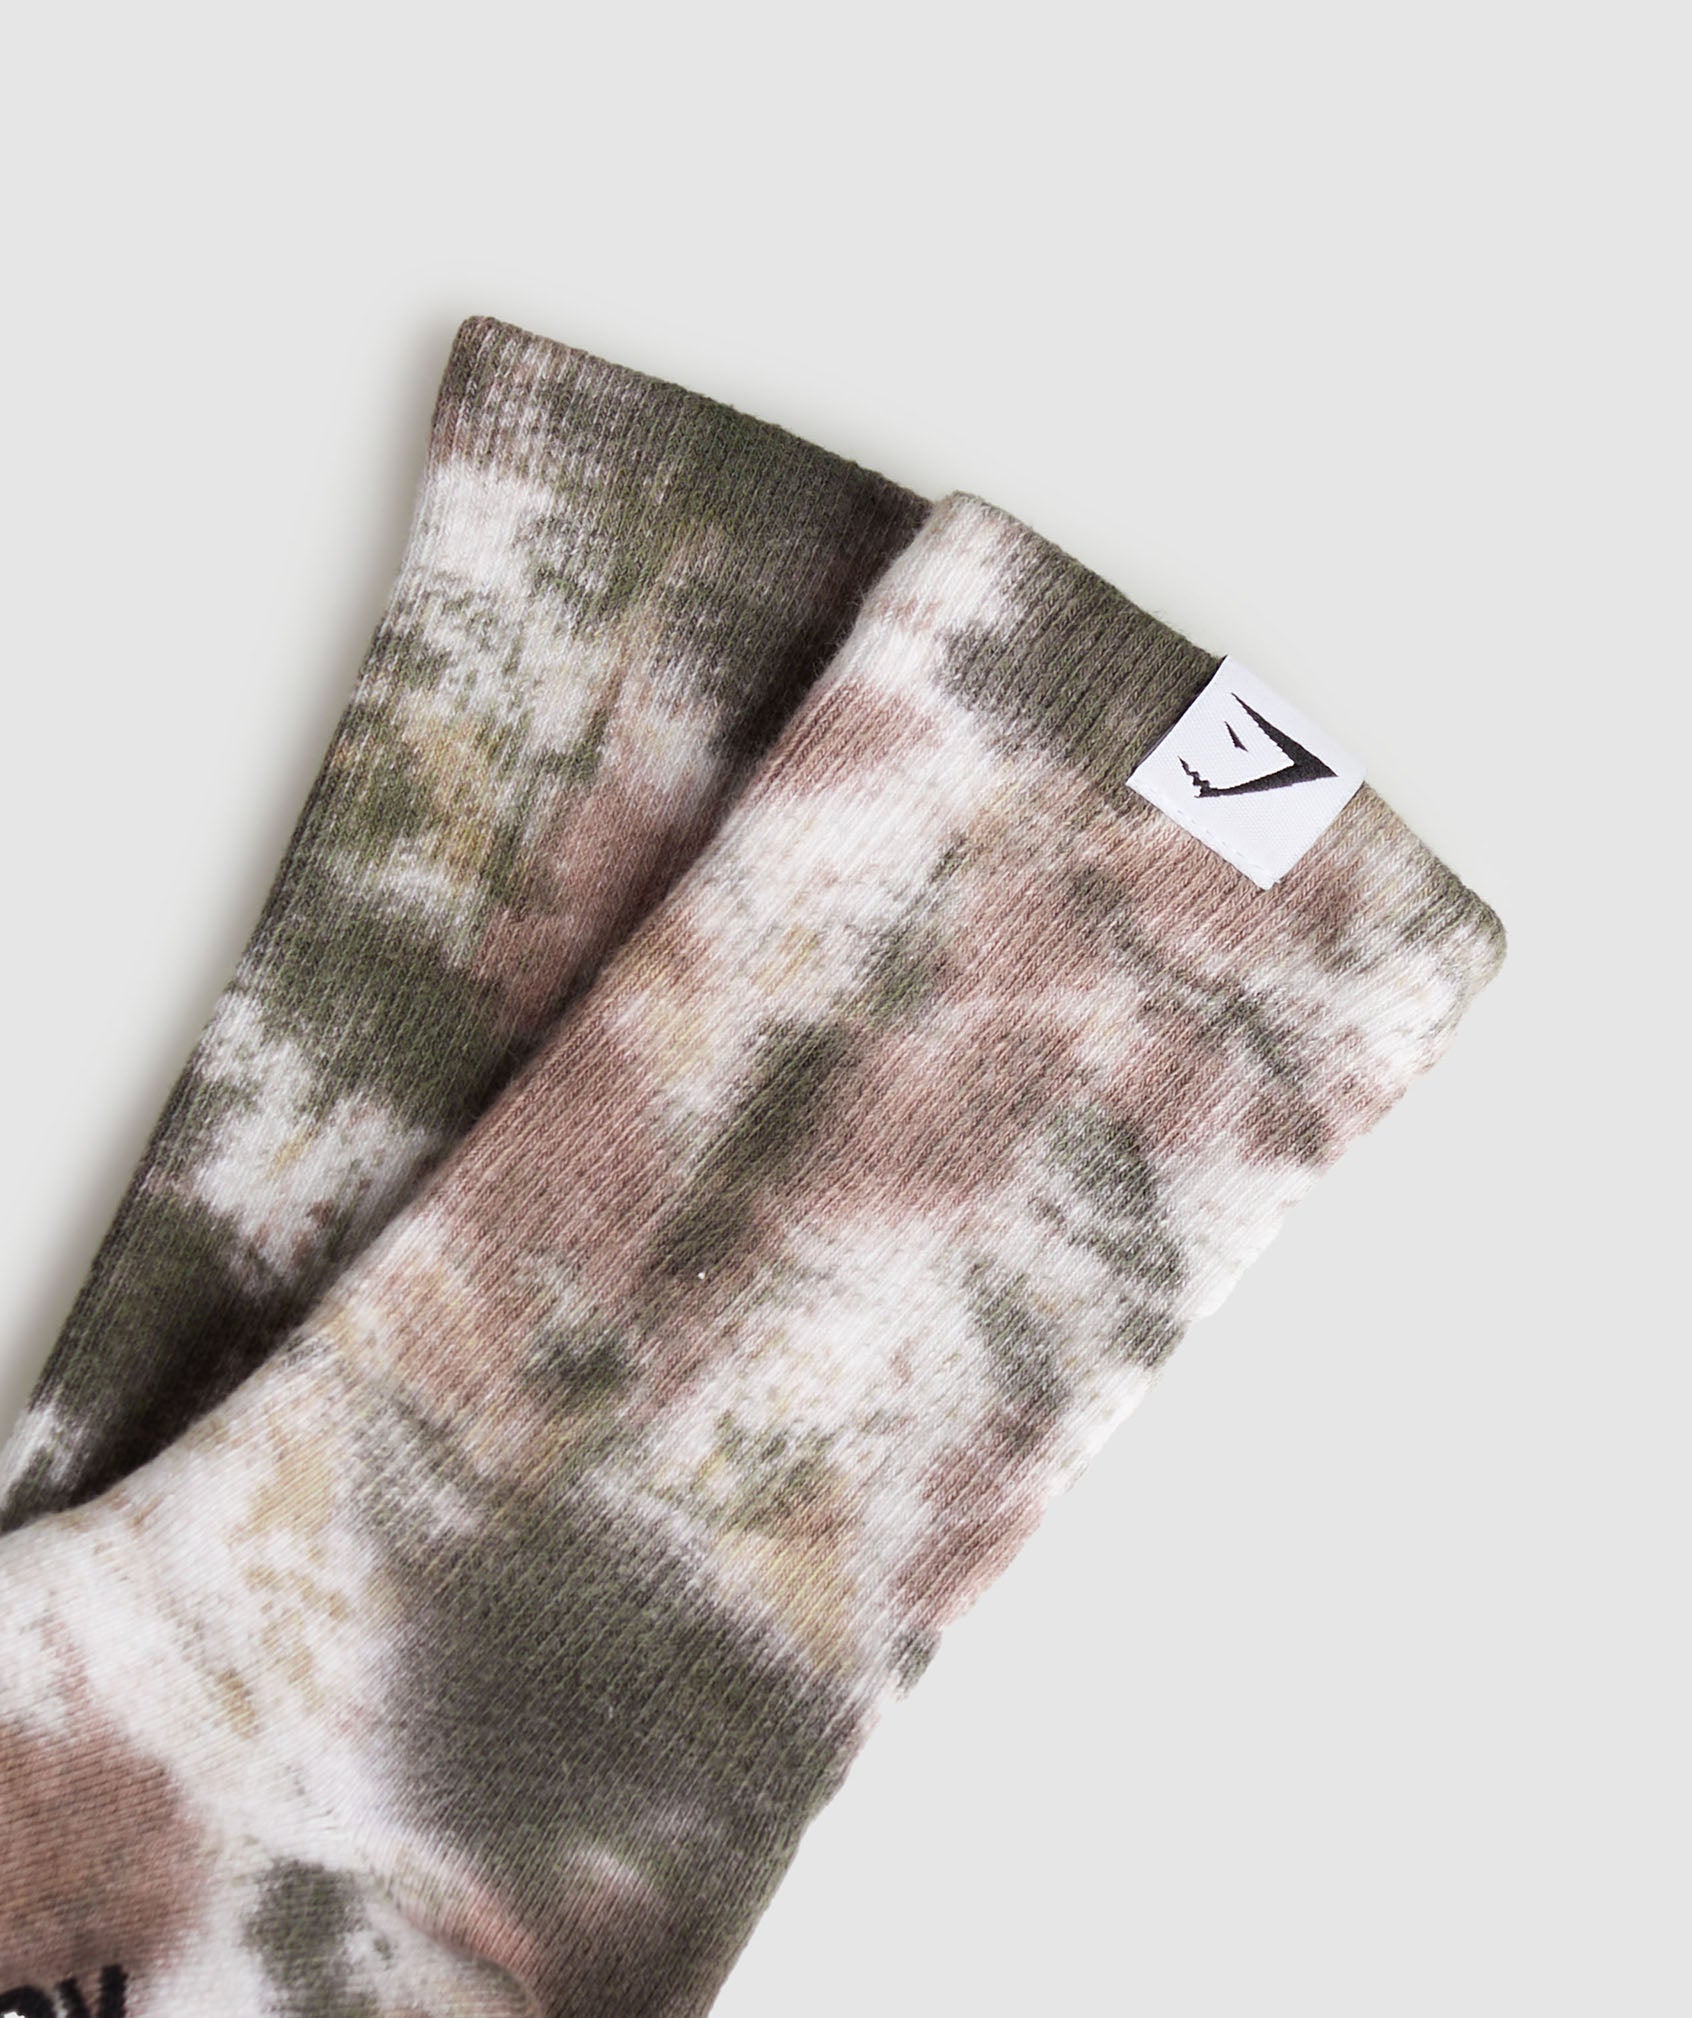 Tie Dye Crew Socks in White/Sand Brown/Taupe Brown/Deep Olive Green - view 2